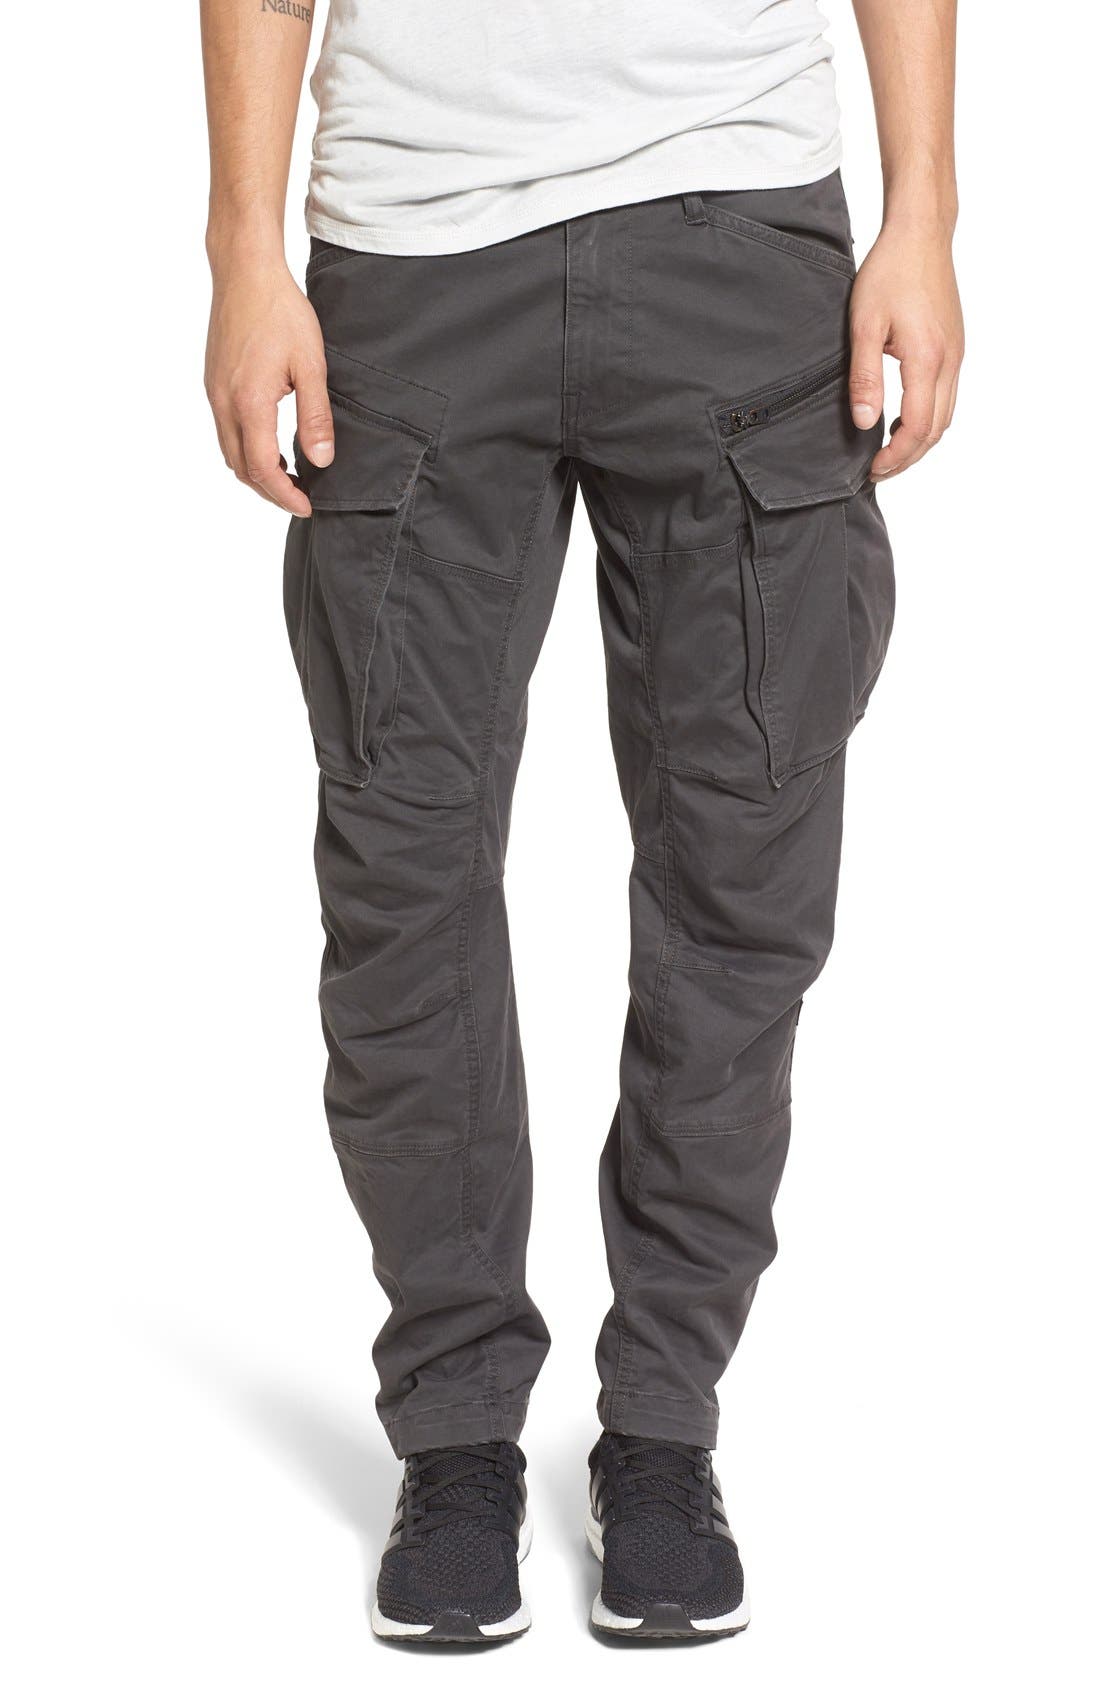 G-STAR RAW ROVIK TAPERED FIT CARGO PANTS,8718598588122